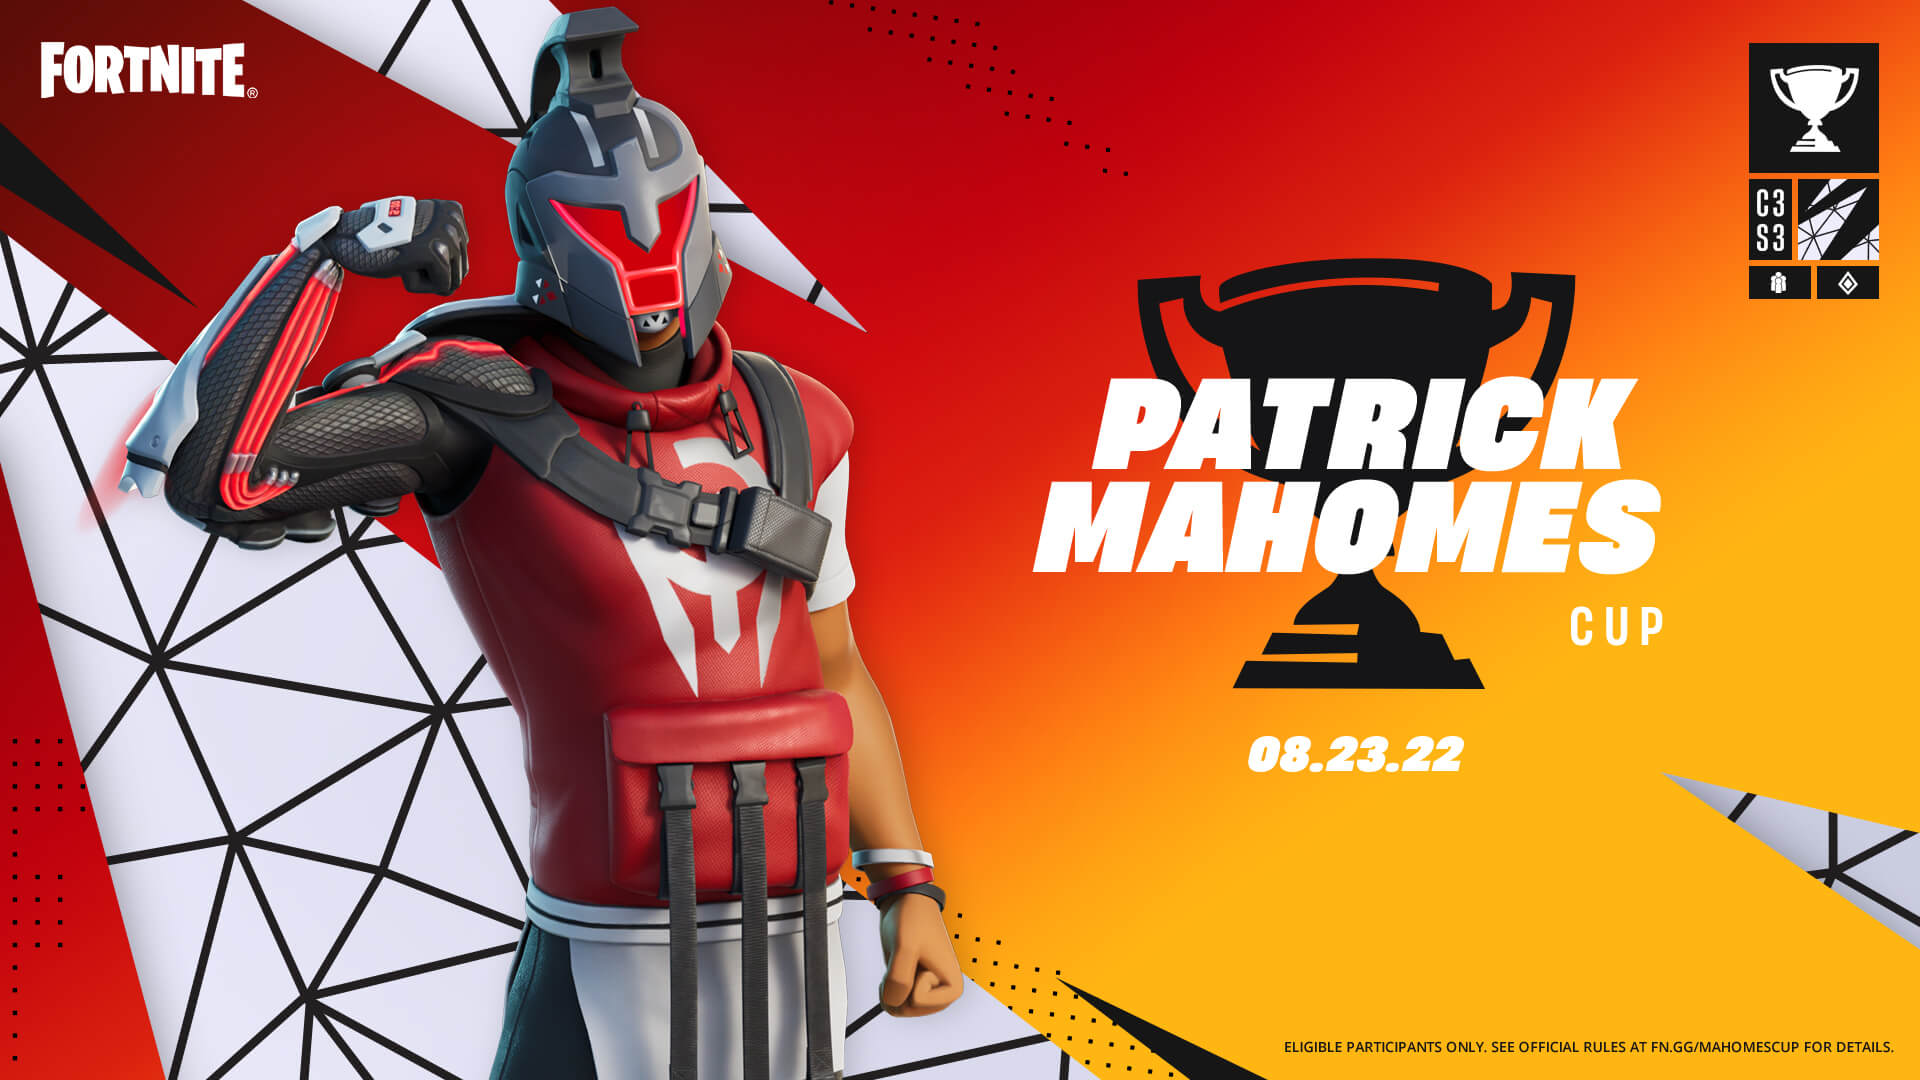 NFL Quarterback & MVP Patrick Mahomes Makes a Play in the Fortnite Icon Series